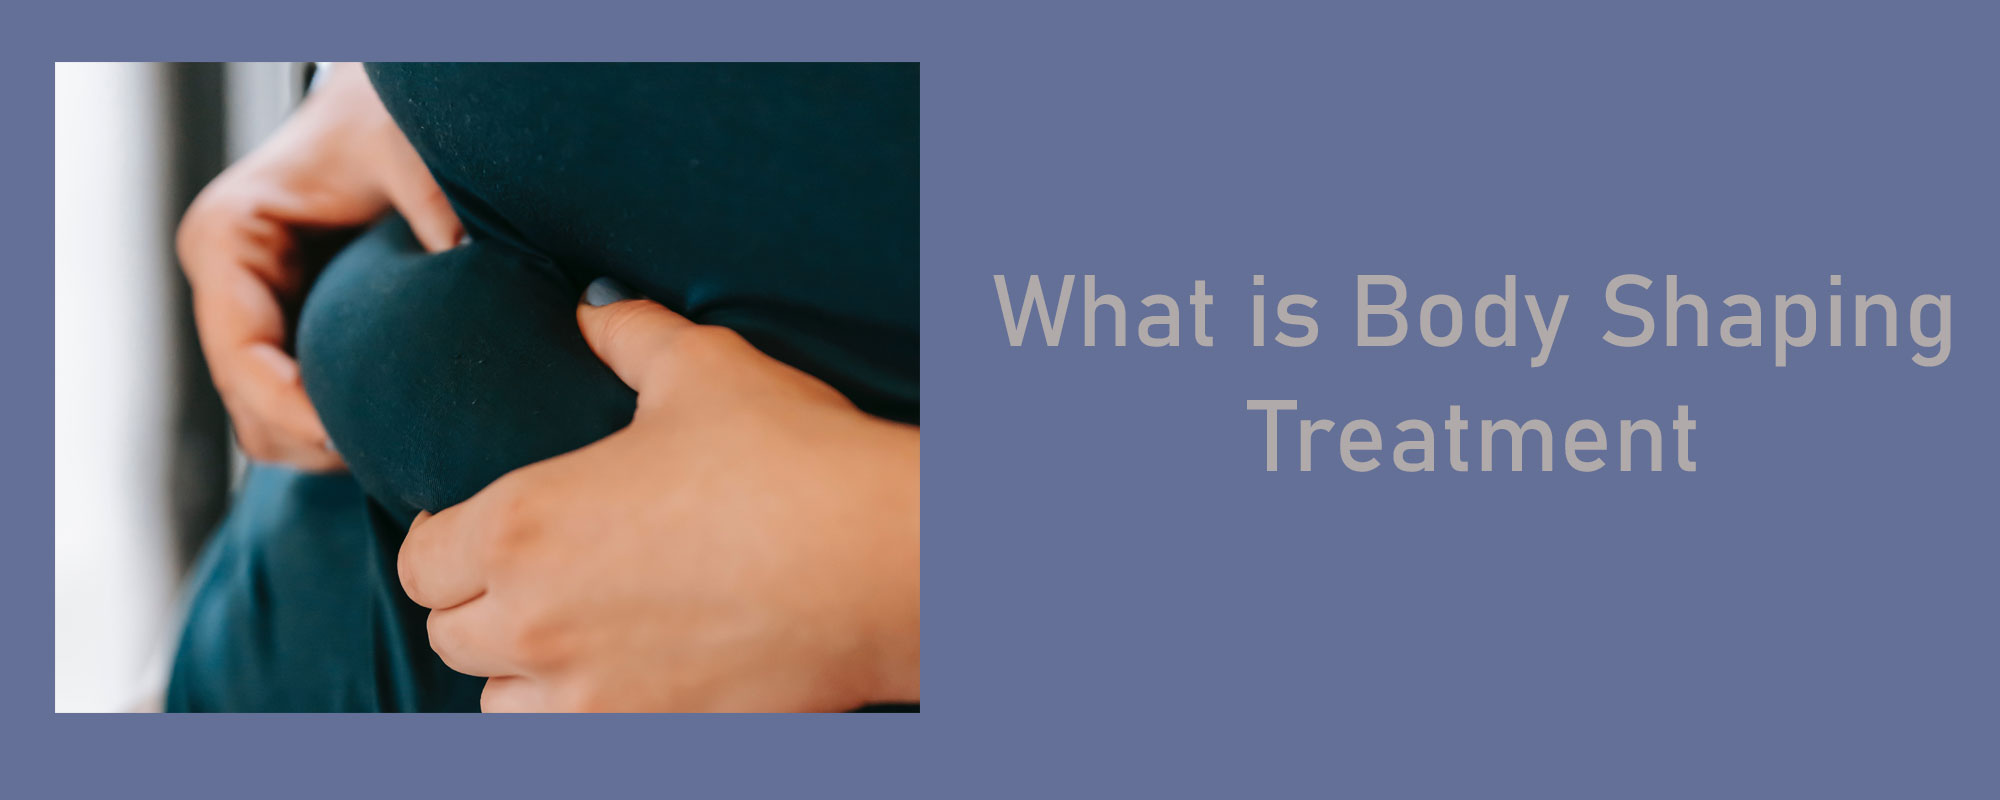 What is Body Shaping Treatment? - 1